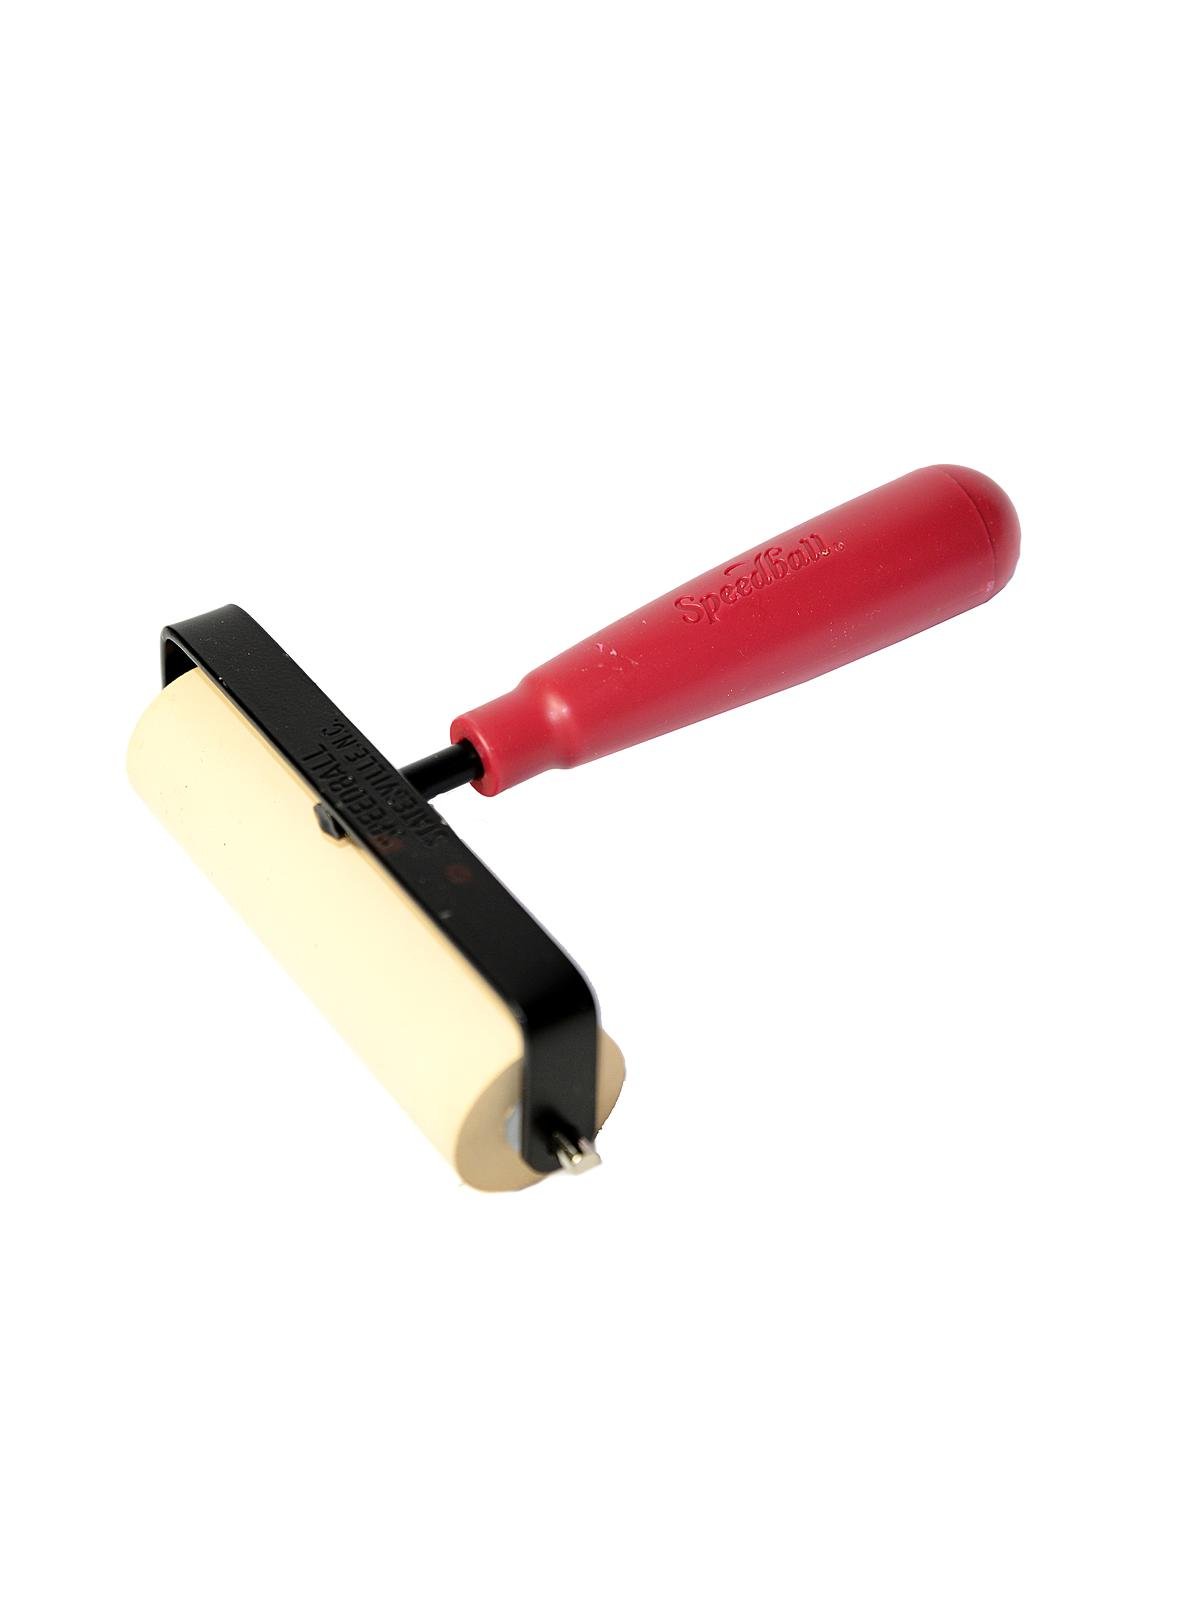 QWORK Soft Rubber Brayer Rollers for Printmaking, Painting, 3